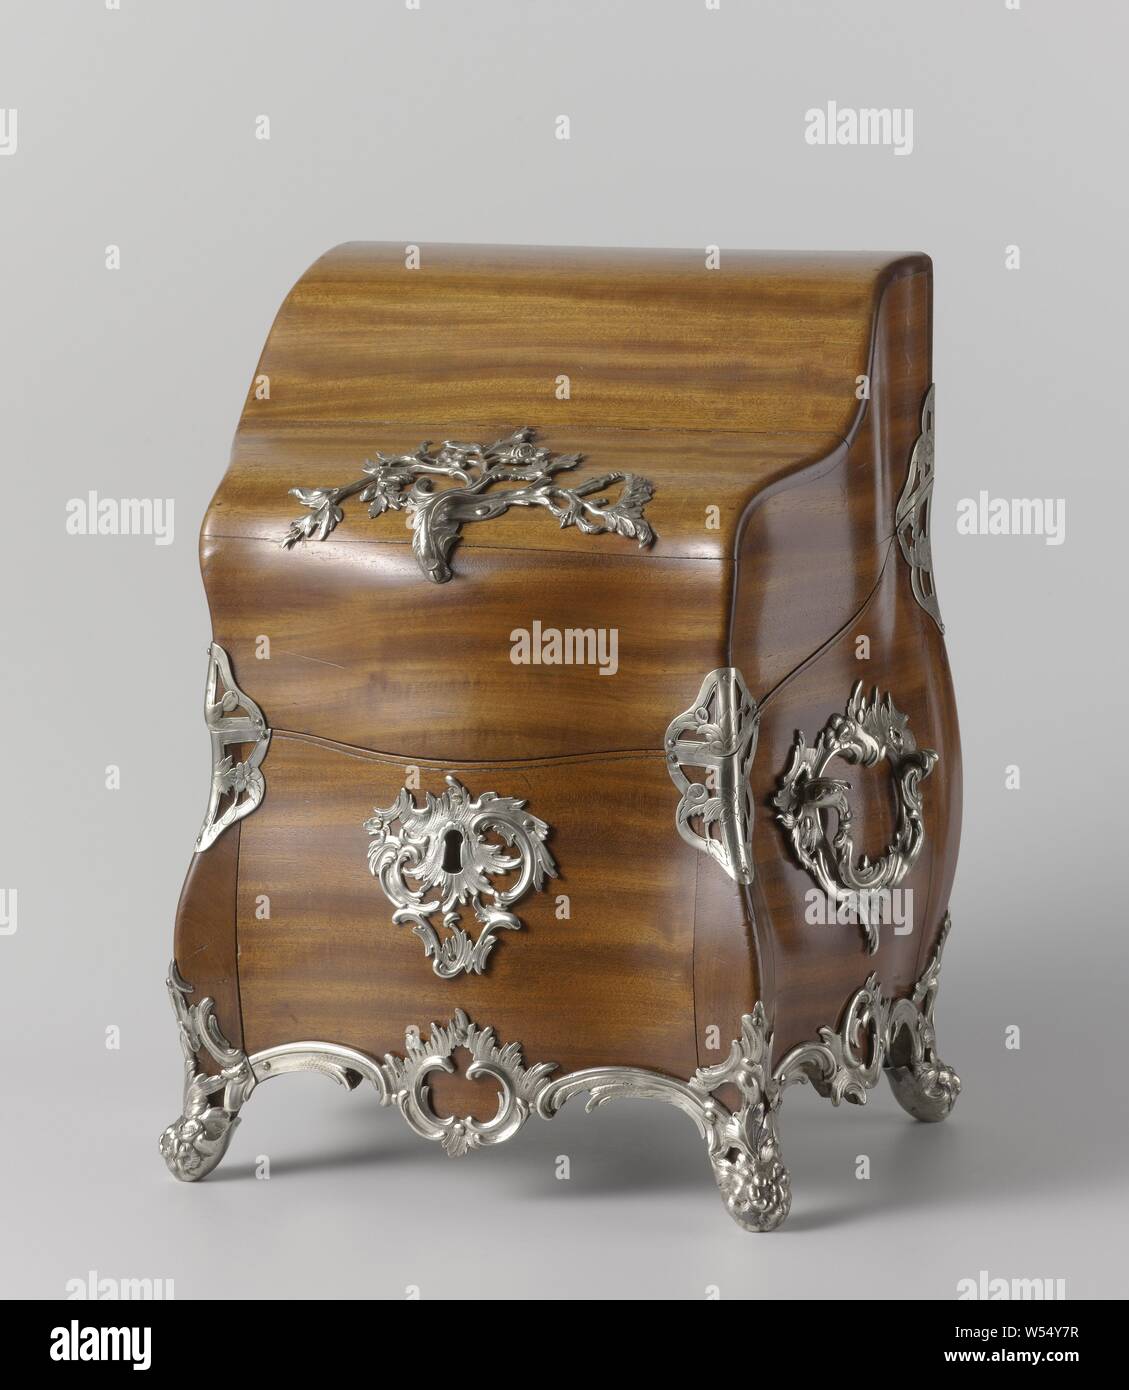 https://c8.alamy.com/comp/W54Y7R/cutlery-canteen-cutlery-case-the-rectangular-mahogany-chest-with-high-rising-rear-has-multiple-arched-sides-protruding-corner-posts-and-a-lid-with-silver-hinges-it-rests-on-four-cast-silver-legs-in-the-shape-of-a-tall-flower-branch-emerging-from-the-legs-run-along-the-underside-of-the-case-with-cast-silver-edges-those-on-the-front-are-made-up-of-two-horizontal-c-volutes-on-either-side-of-an-asymmetrical-open-worked-cartouche-of-two-standing-c-volutes-crowned-by-a-foam-edge-that-on-both-sides-from-two-horizontal-c-volutes-on-either-side-of-a-tilted-cartouche-comparable-to-the-one-W54Y7R.jpg